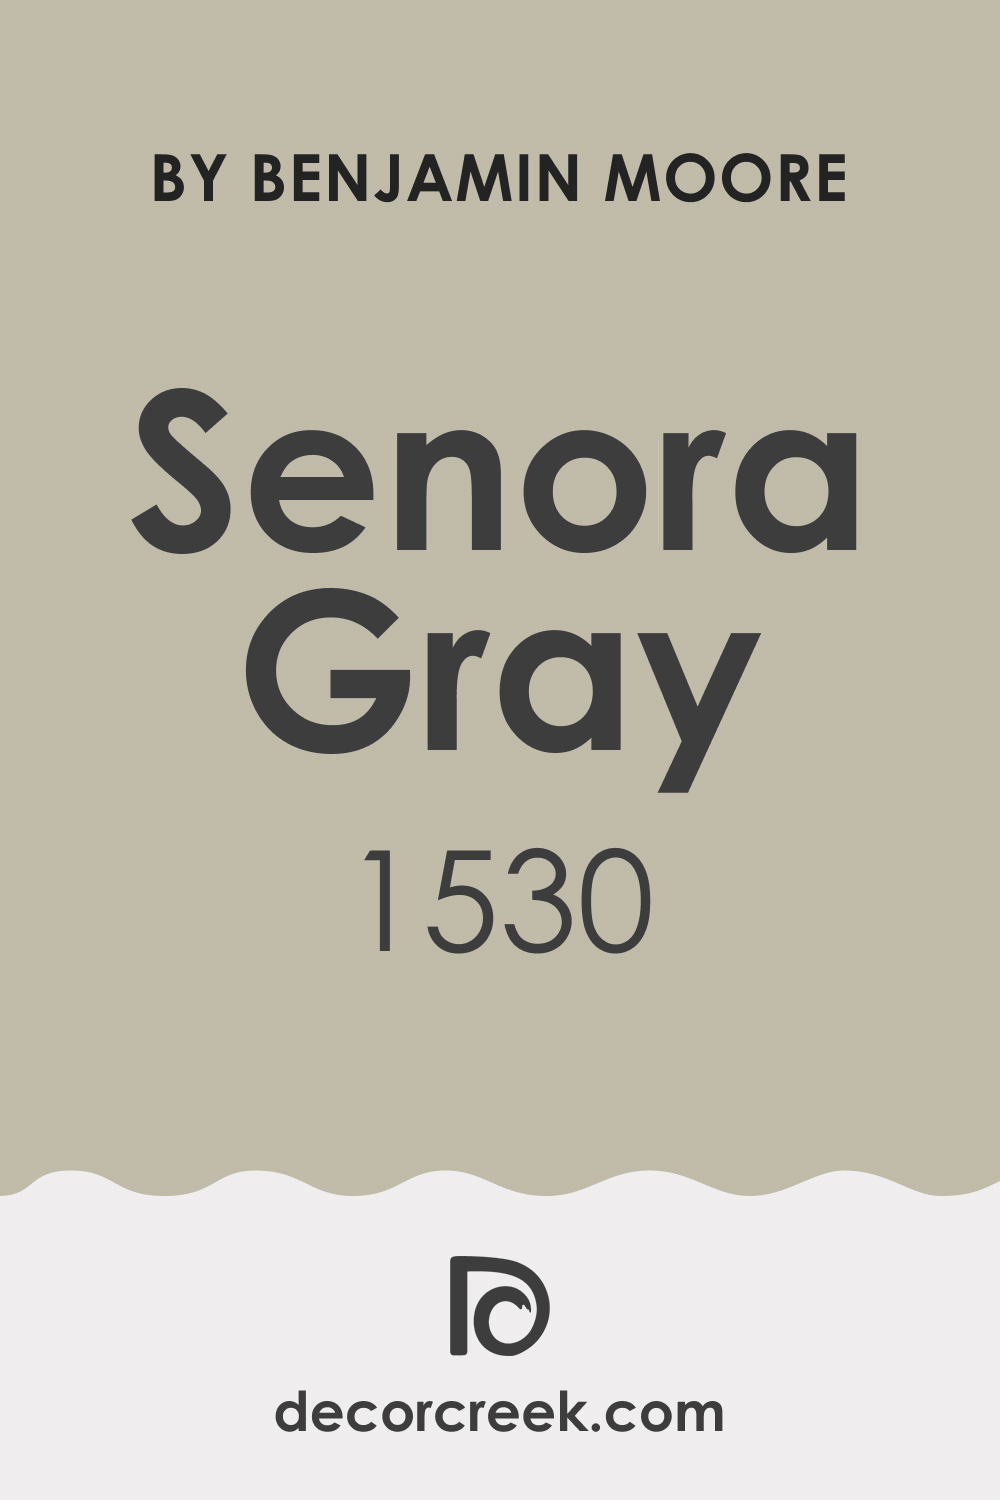 What Color Is Senora Gray 1530?